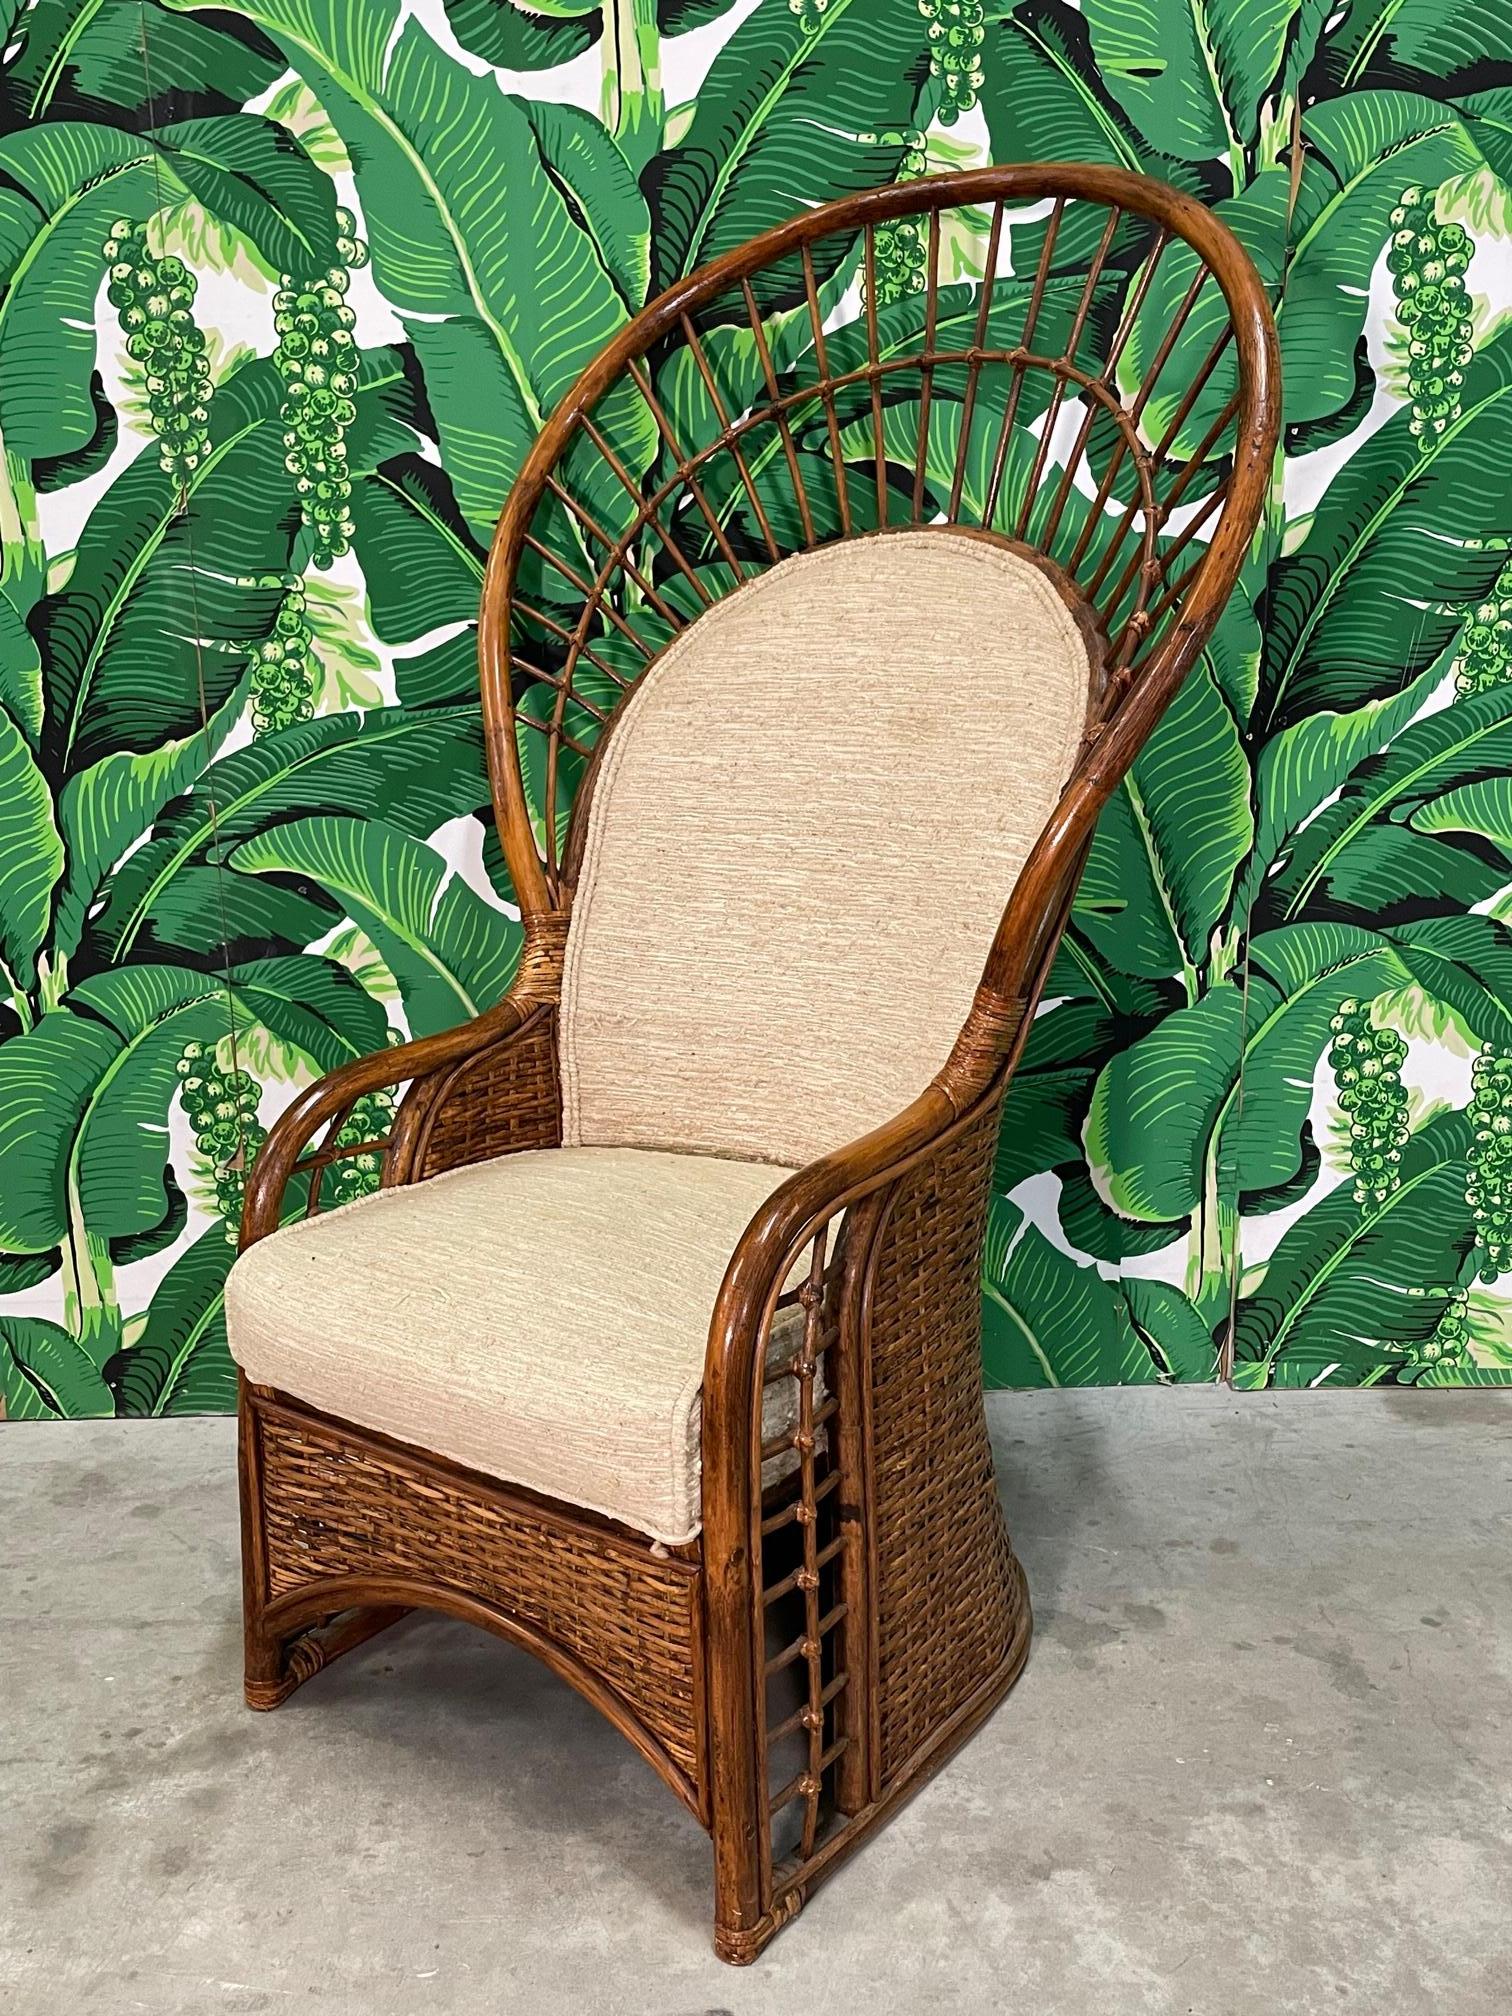 Rattan and wicker peacock chair features upholstered seat and back and a rich, dark brown finish. Full rattan construction. Good condition with imperfections consistent with age, see photos for details.
For a shipping quote to your exact zip code,